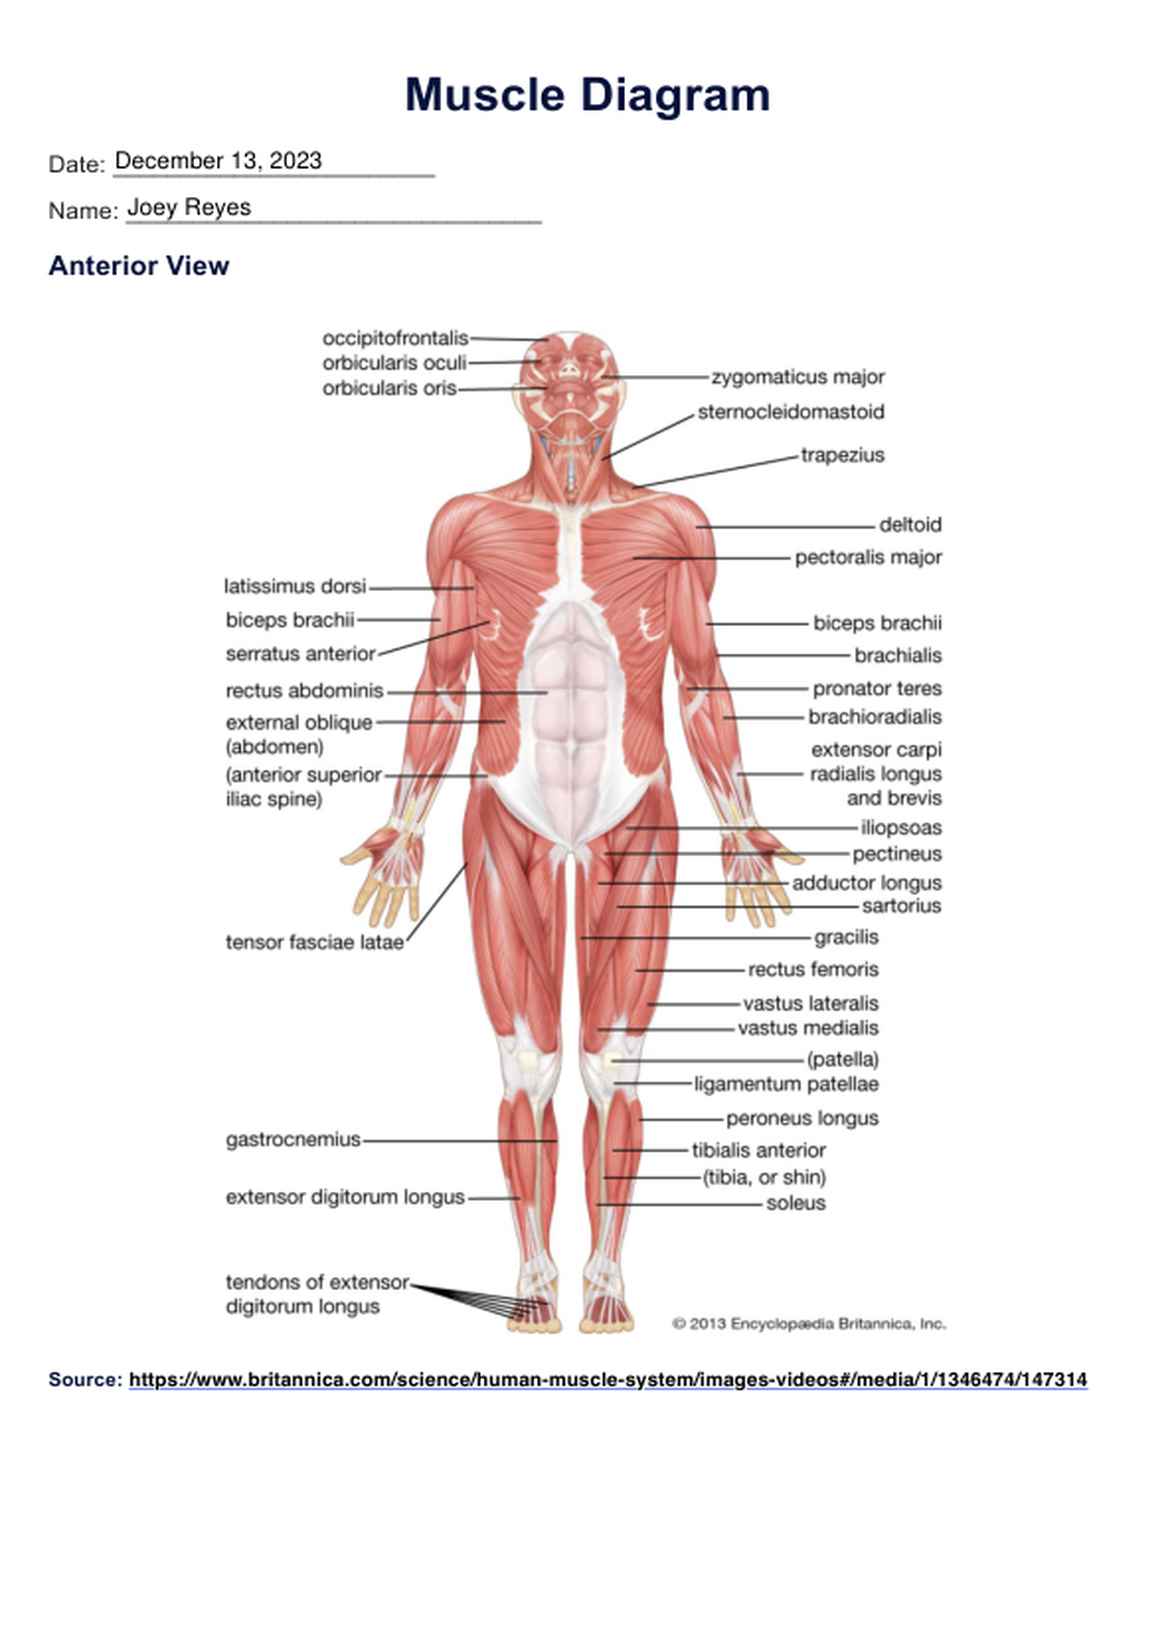 Muscle Diagram PDF Example